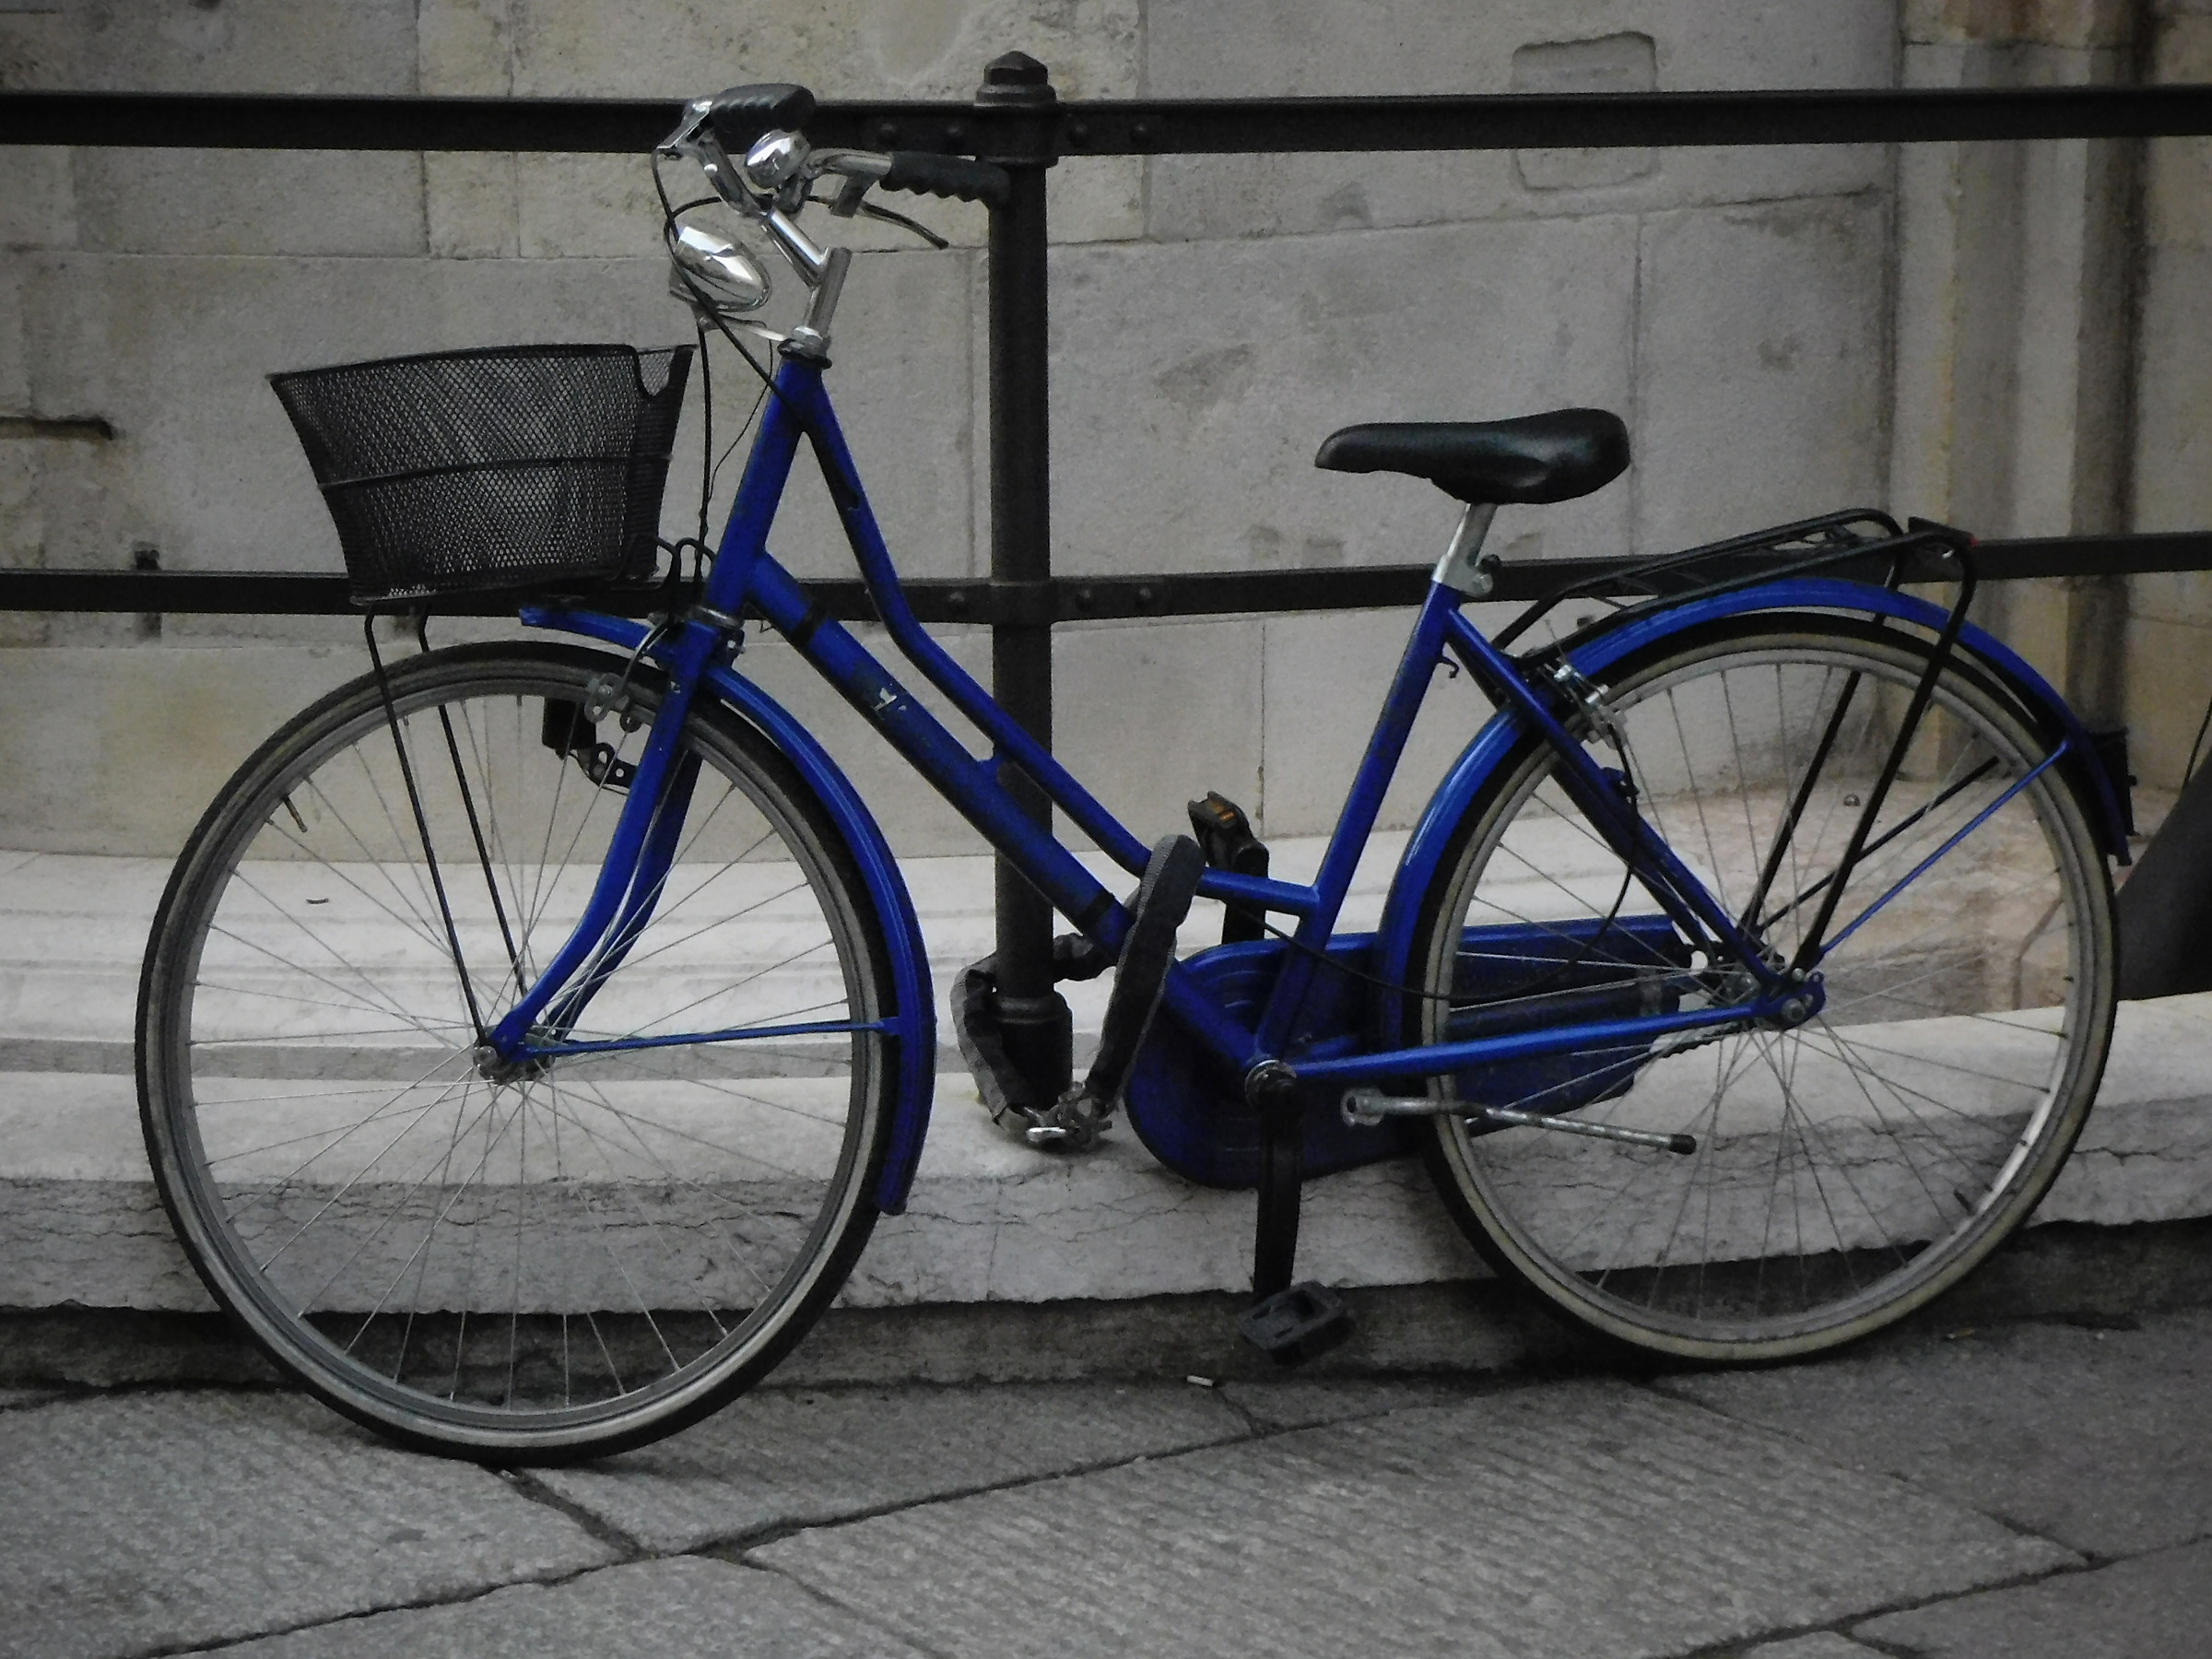 The Blue Bicycle...